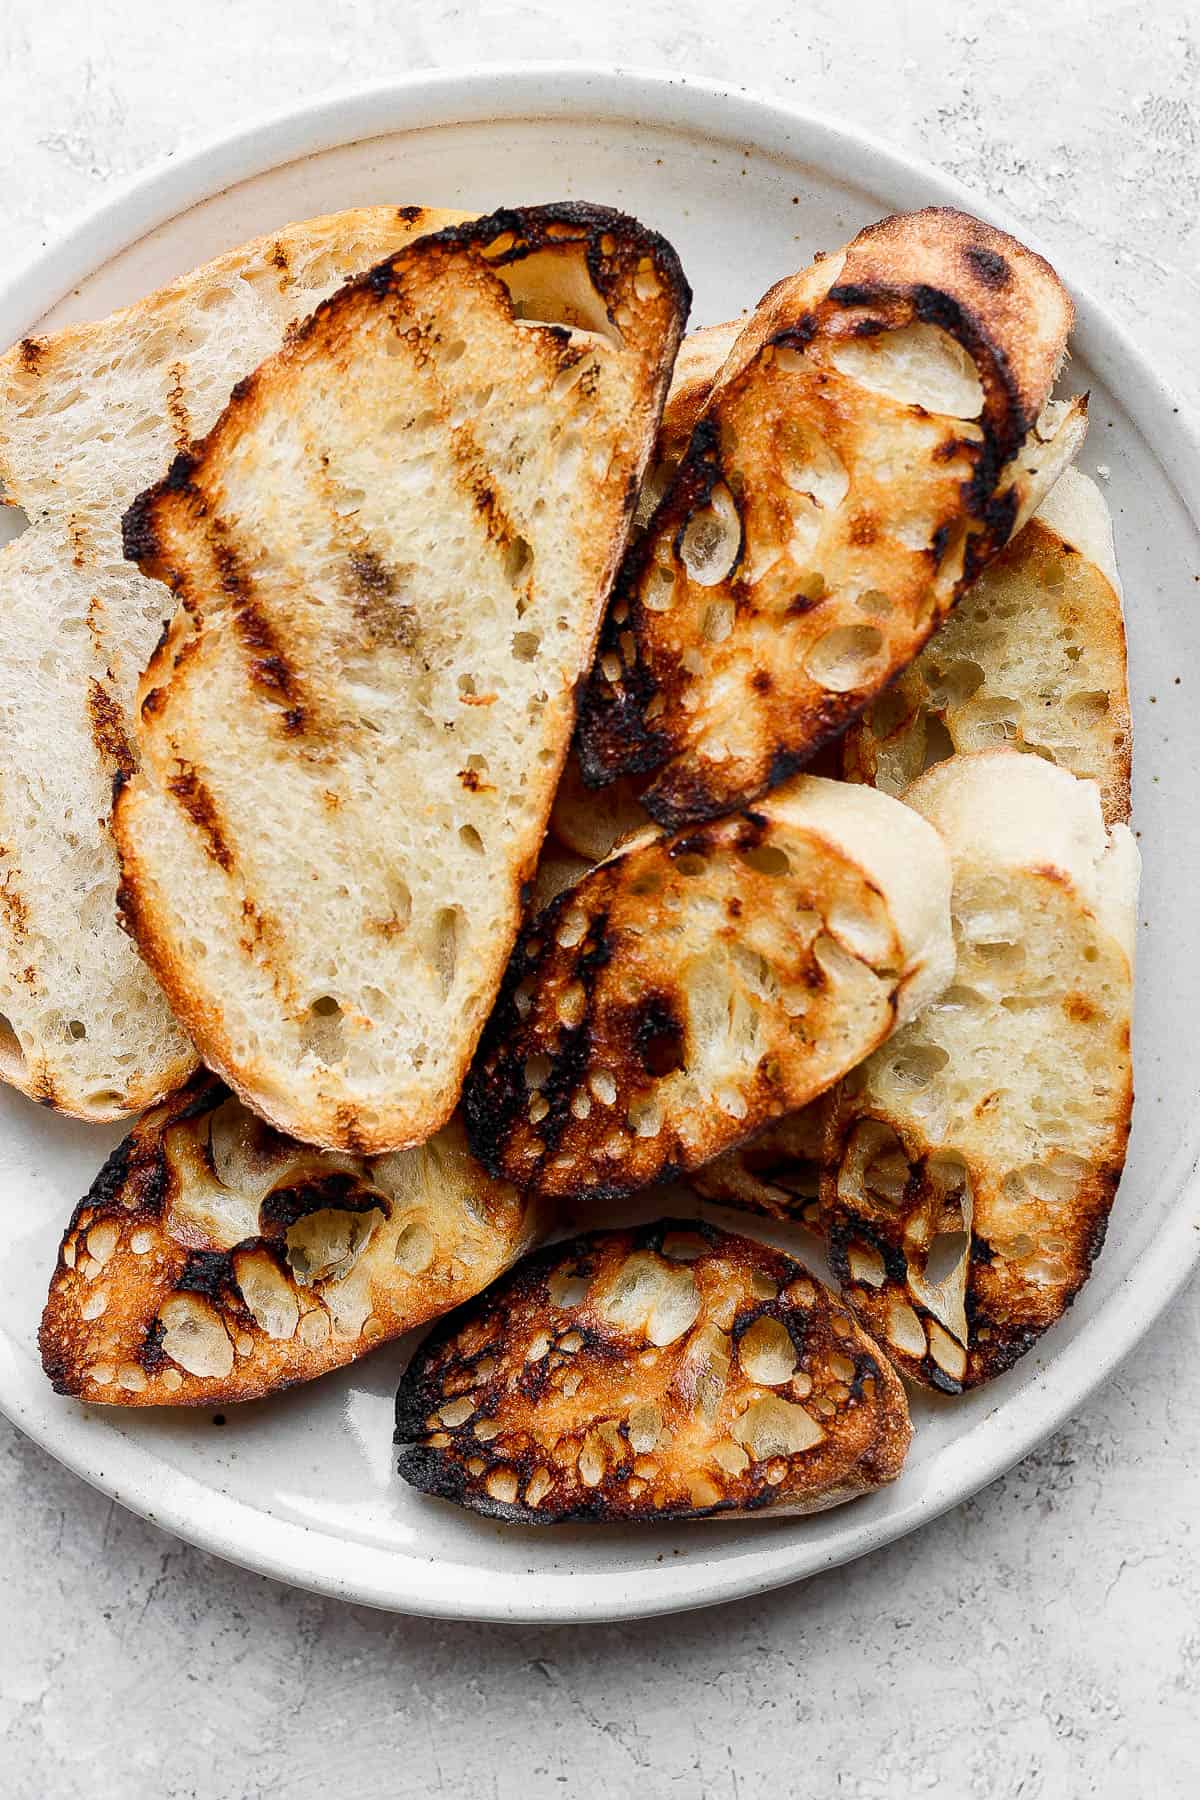 Slices of grilled bread and crostini on a plate.